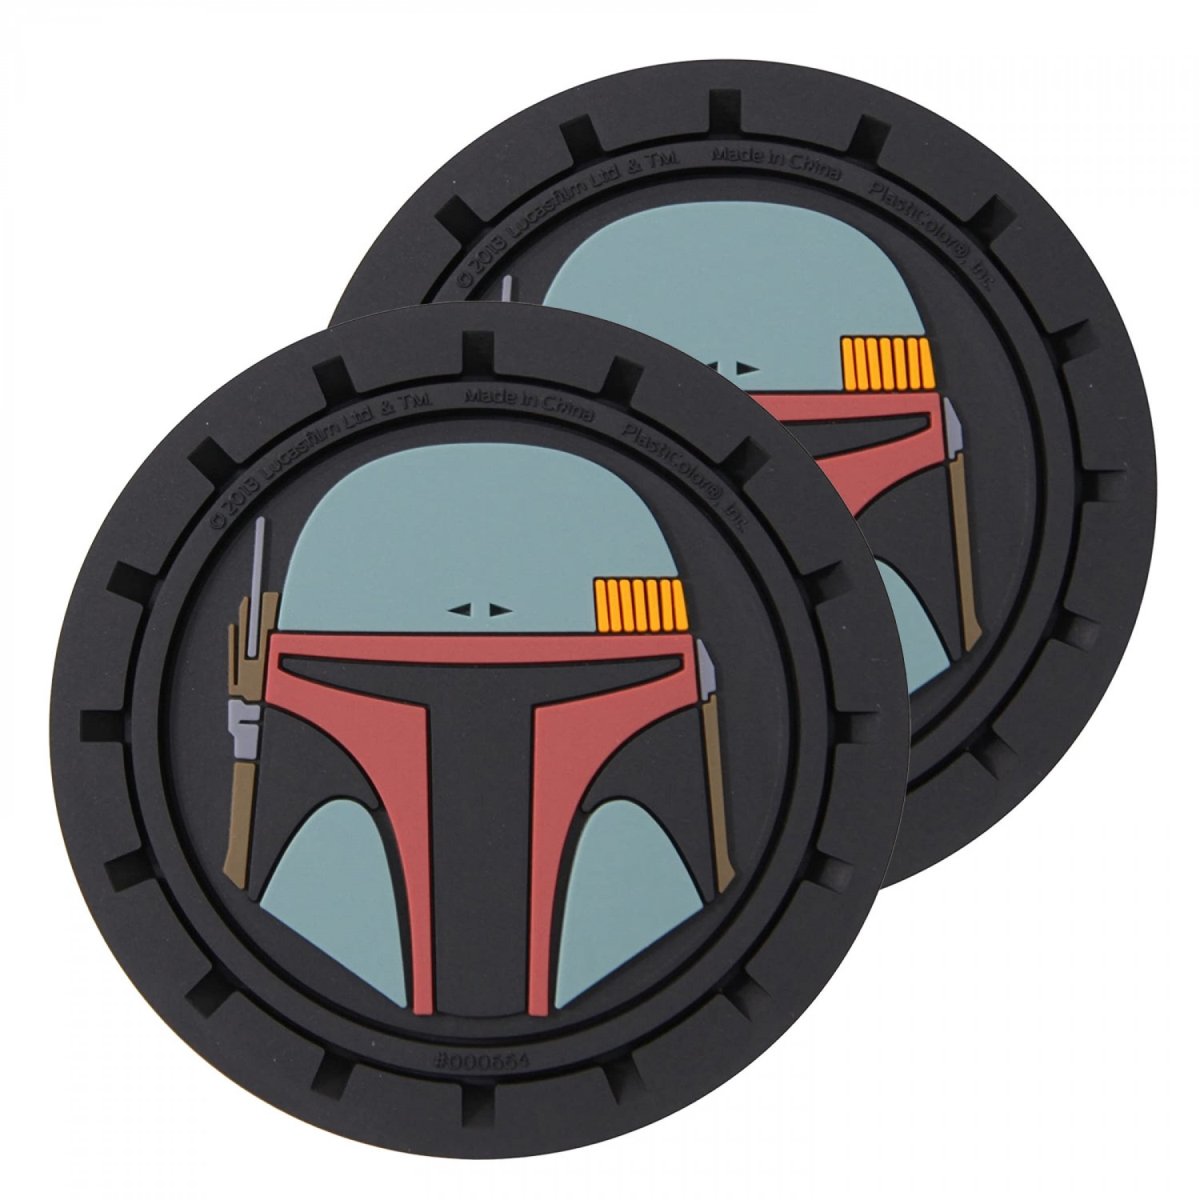 Picture of Star Wars 808040 Star Wars Boba Fett Car Cup Holder Coaster - Pack of 2